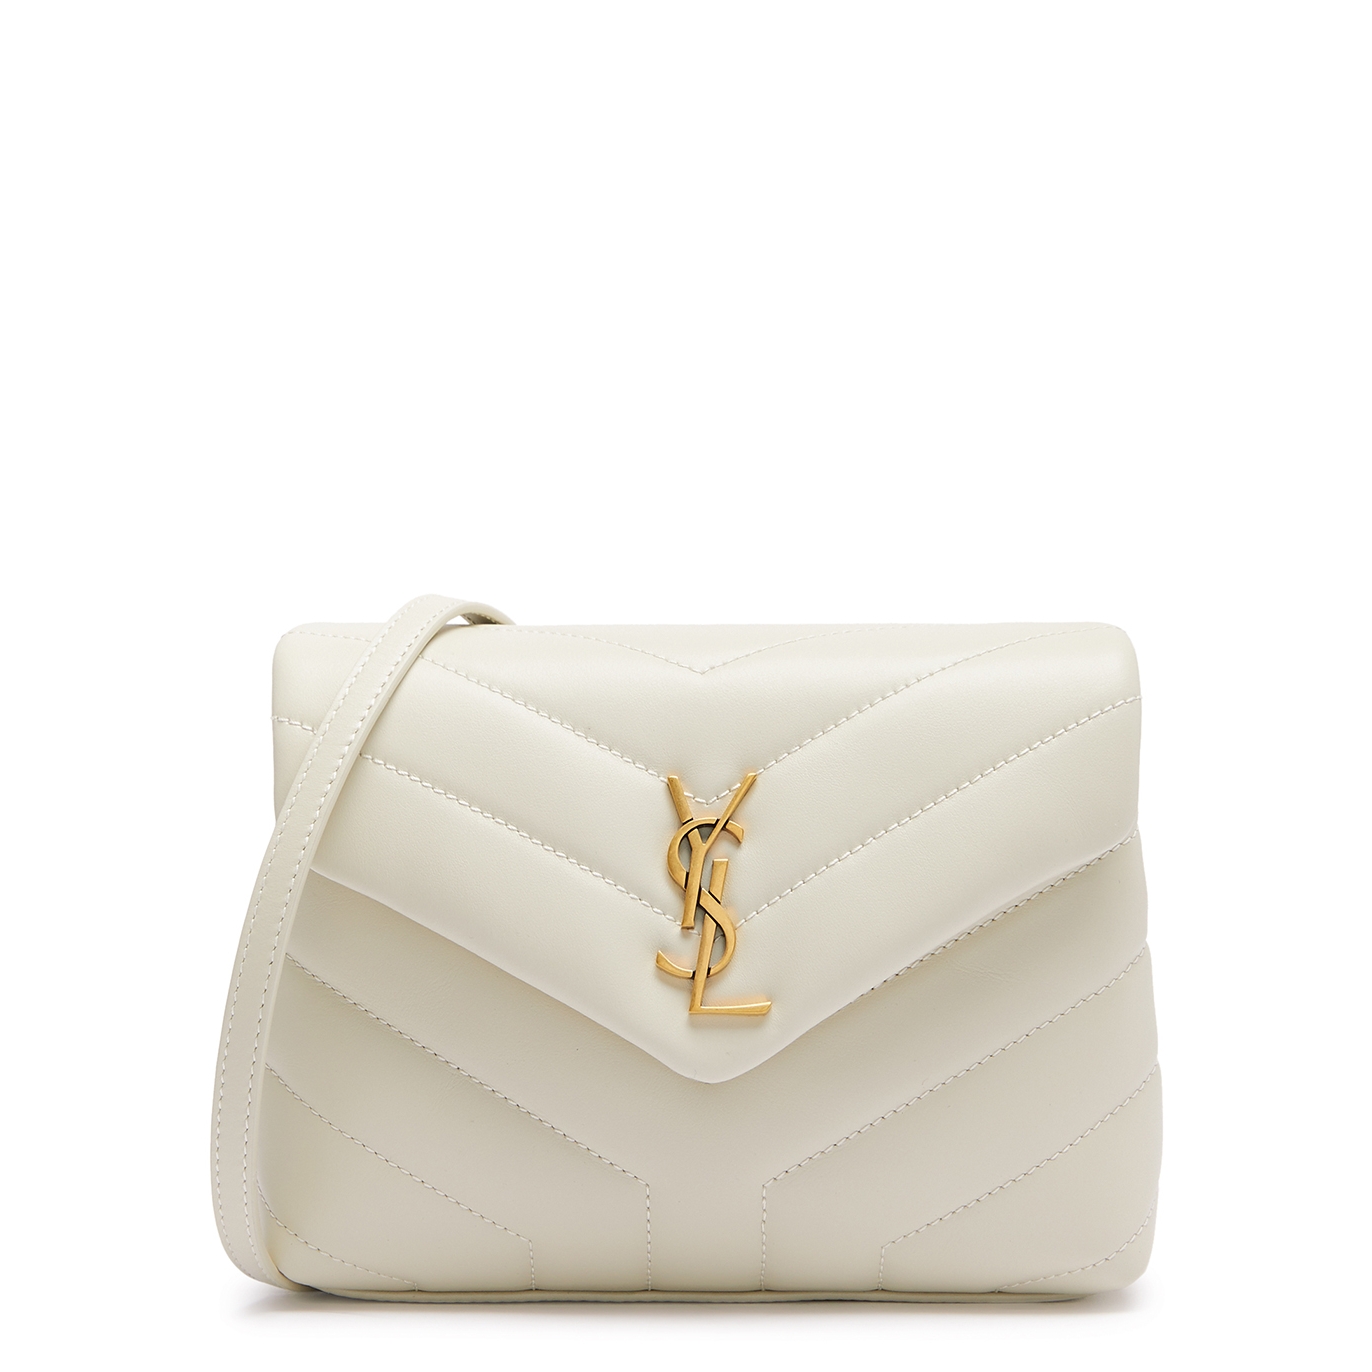 Saint Laurent Loulou Toy Quilted Leather Cross-body Bag - White